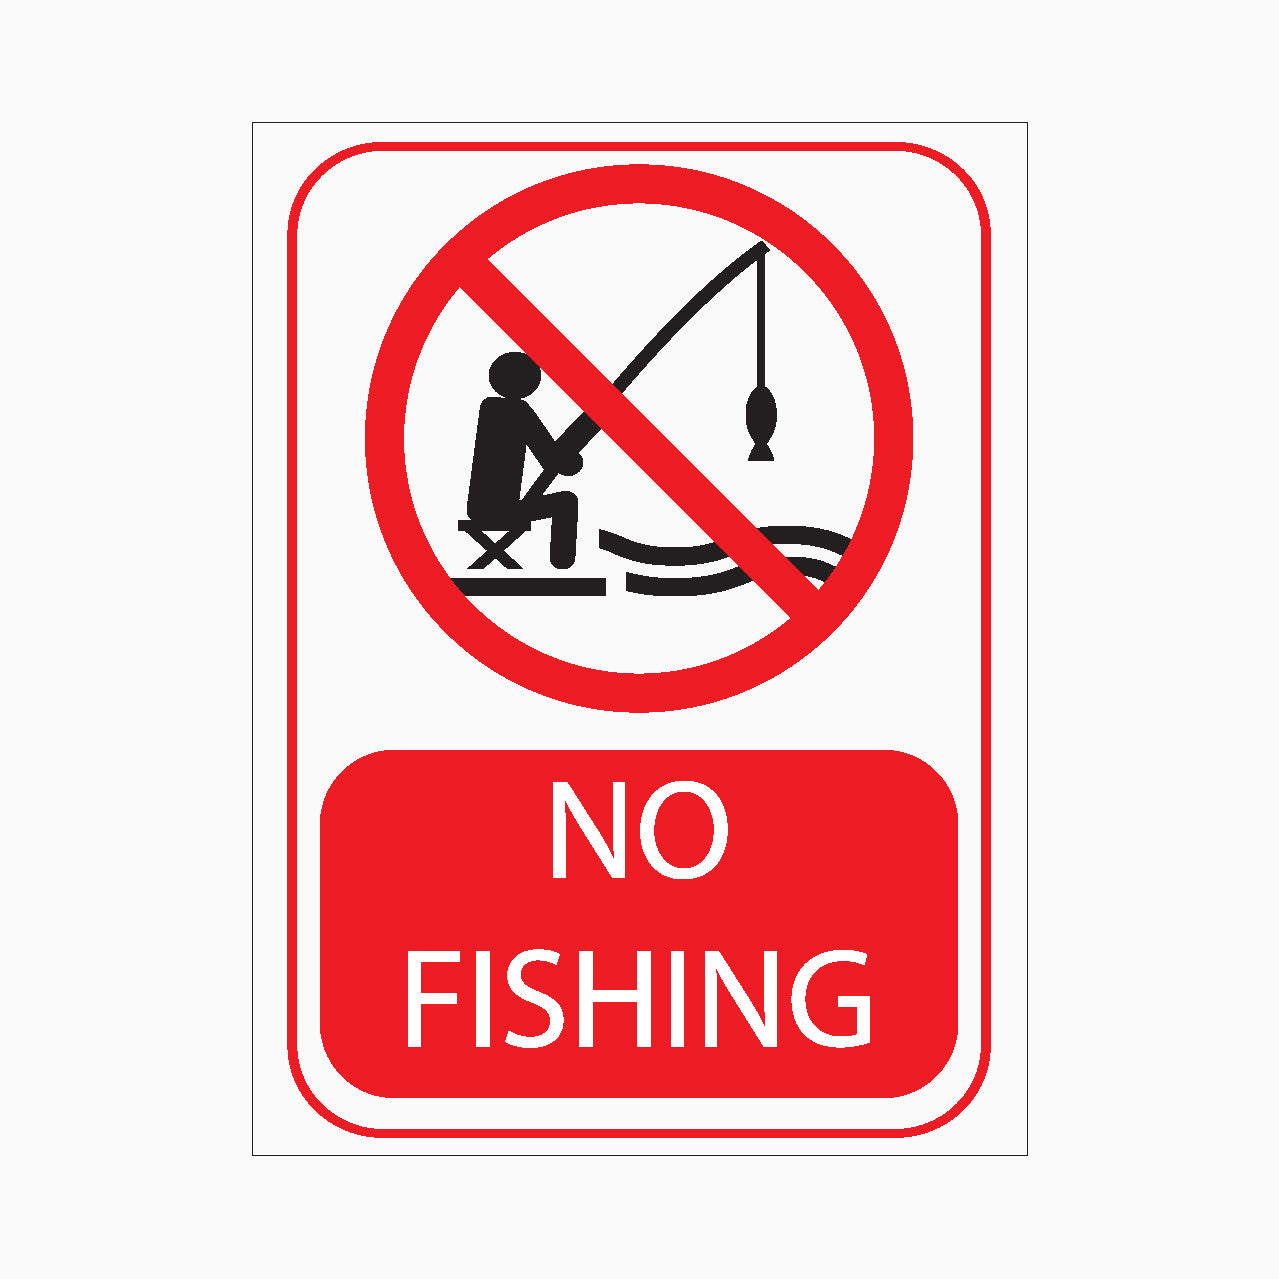 No Fishing Sign - prohibition sign